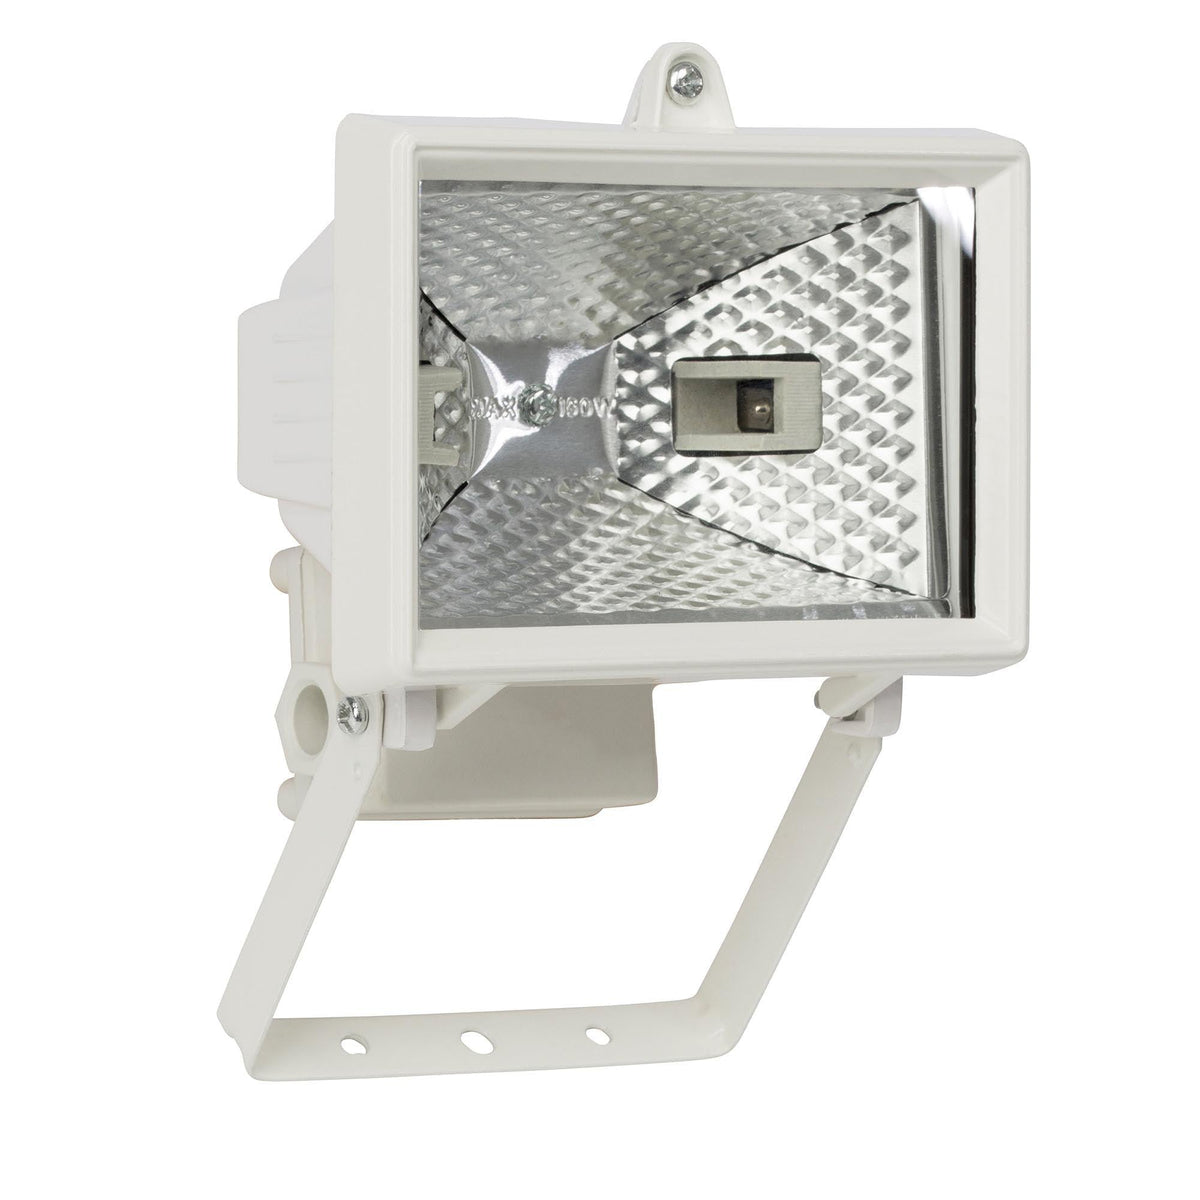 Brilliant 1 Light 150W Tanko Outdoor Wall Floodlight - White | 96161/05 from DID Electrical - guaranteed Irish, guaranteed quality service. (6977599996092)